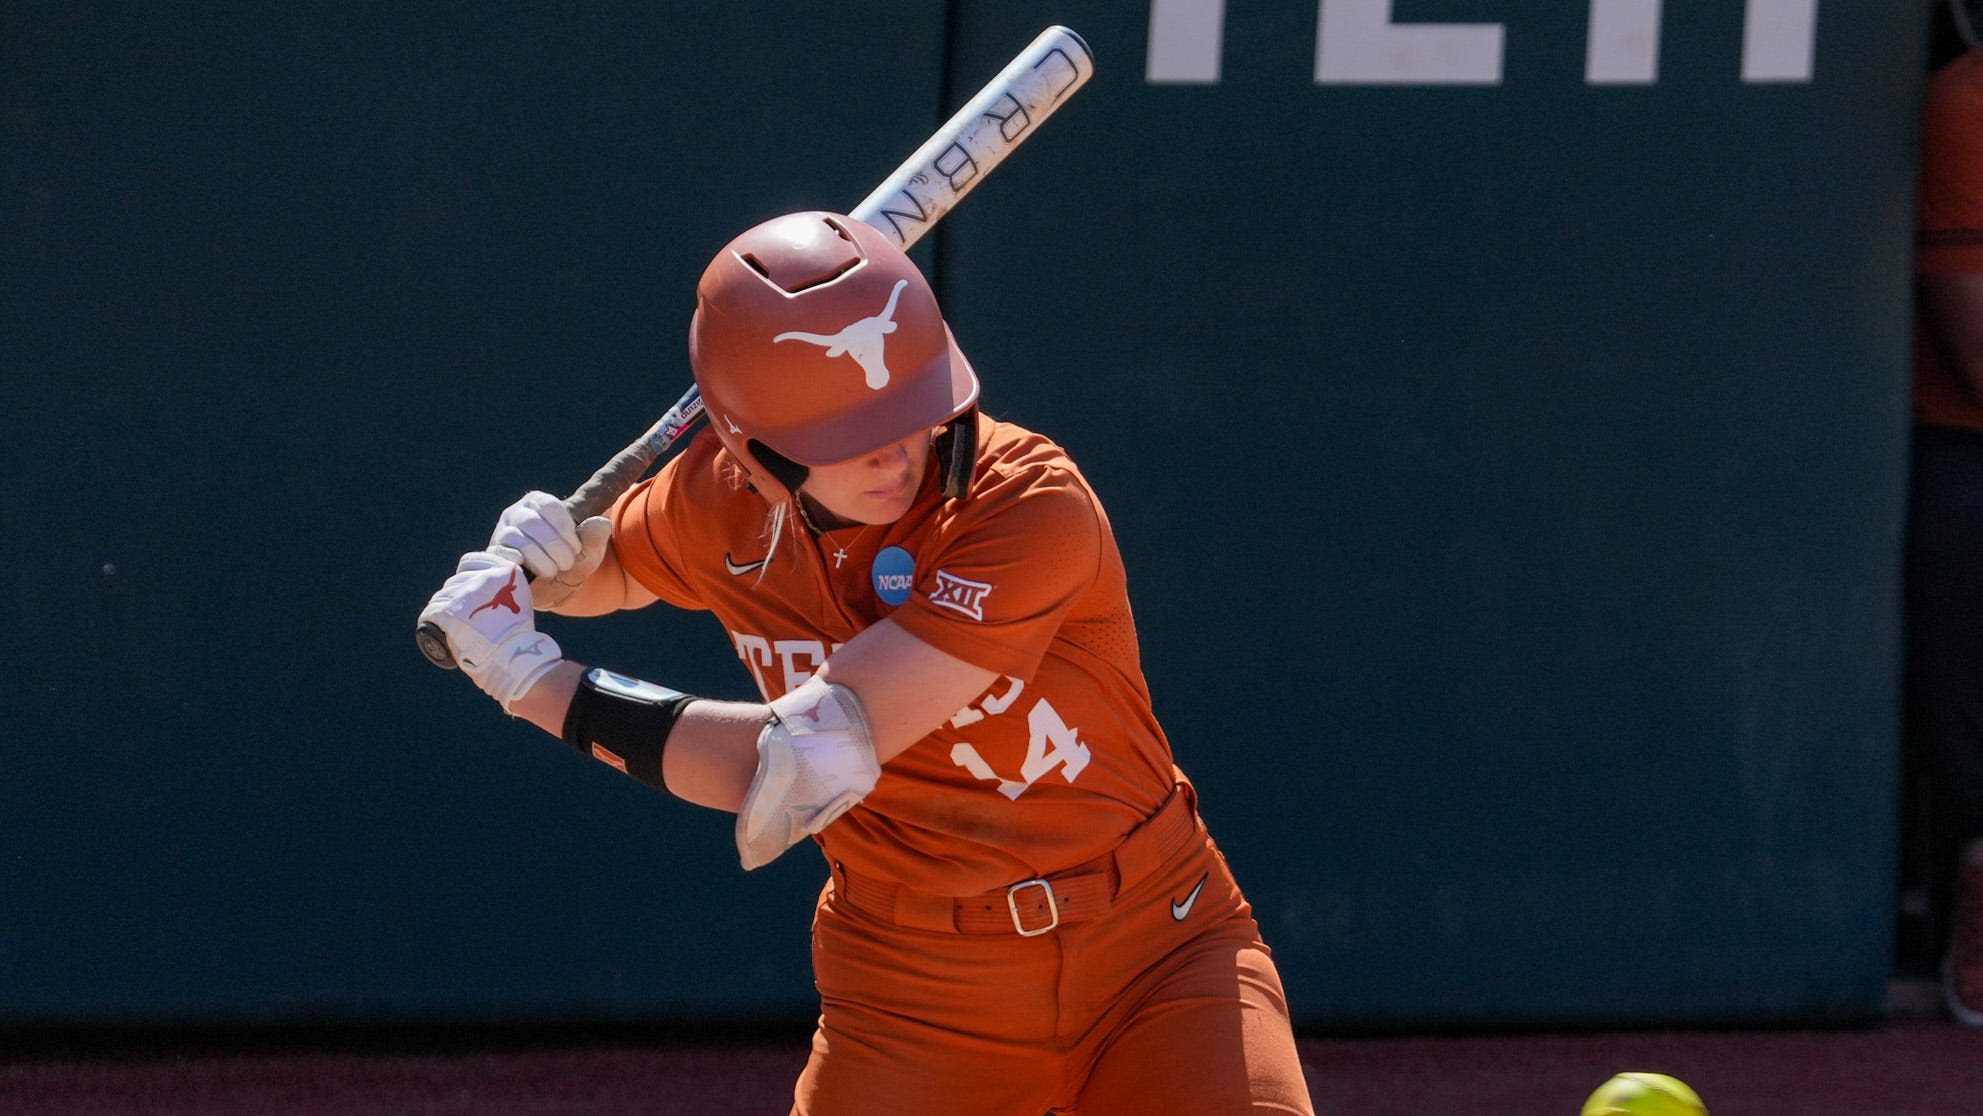 Texas softball slugger Reese Atwood named one of three finalists for national player of year